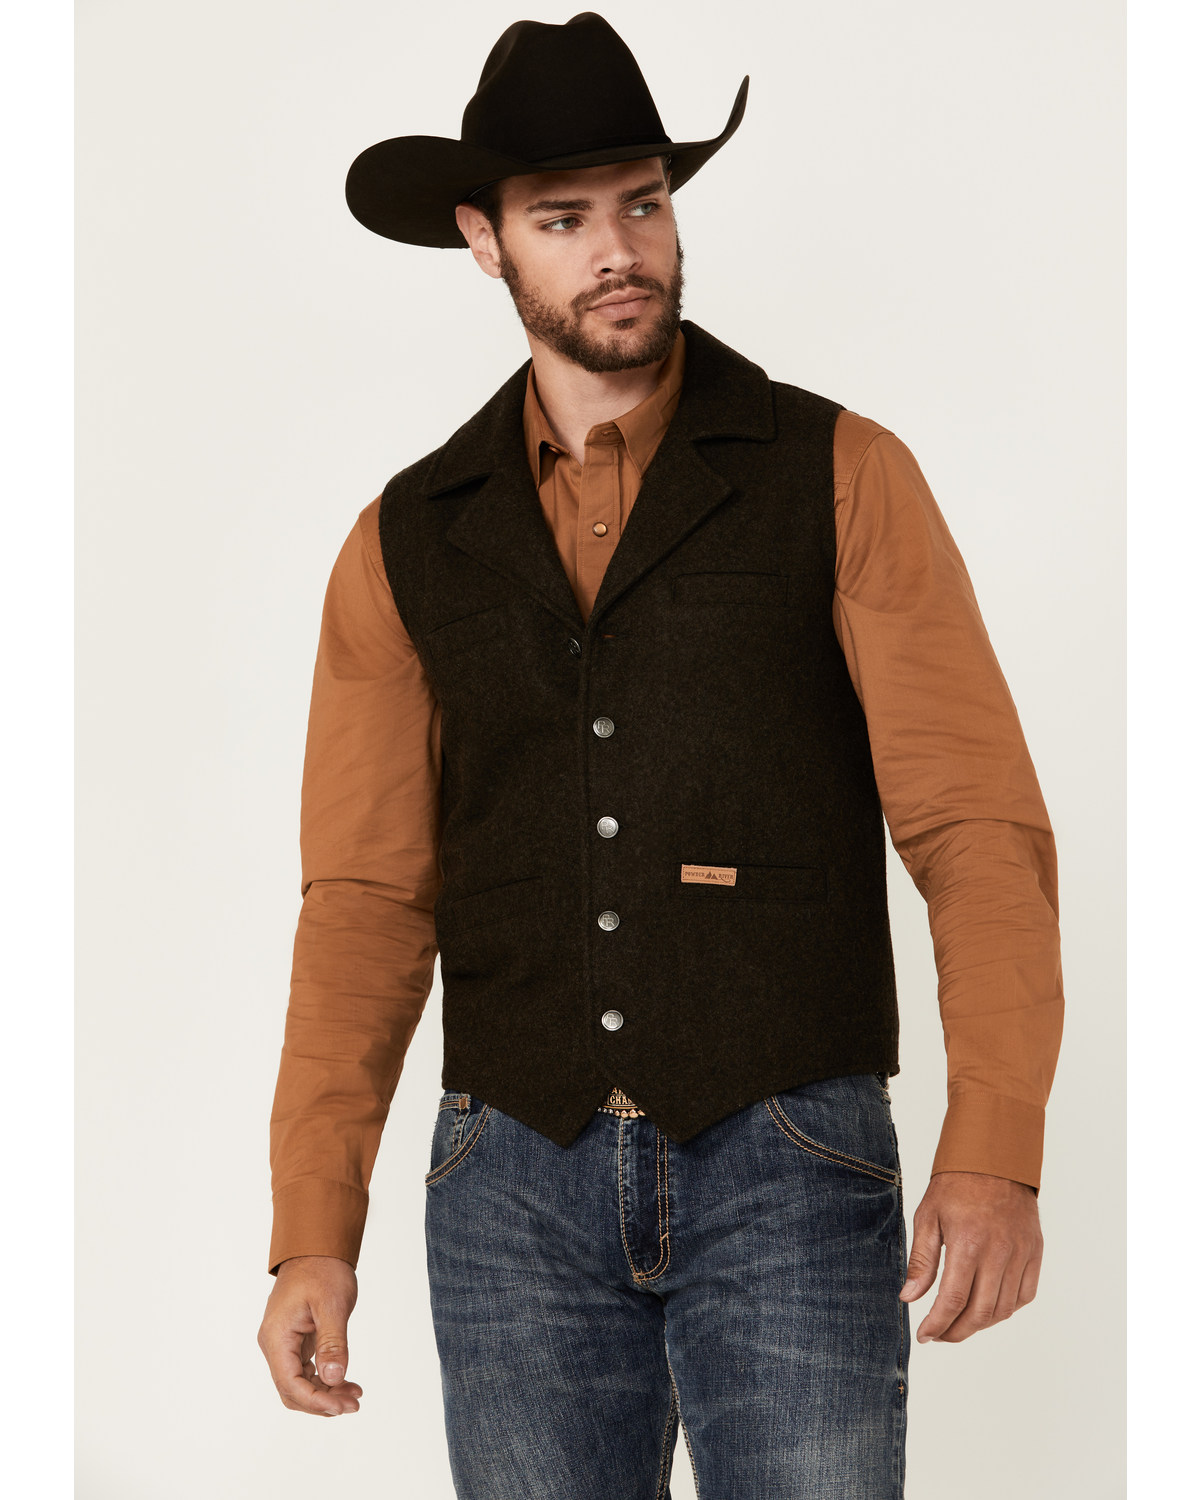 Powder River Outfitters Men's Wool Button-Down Vest